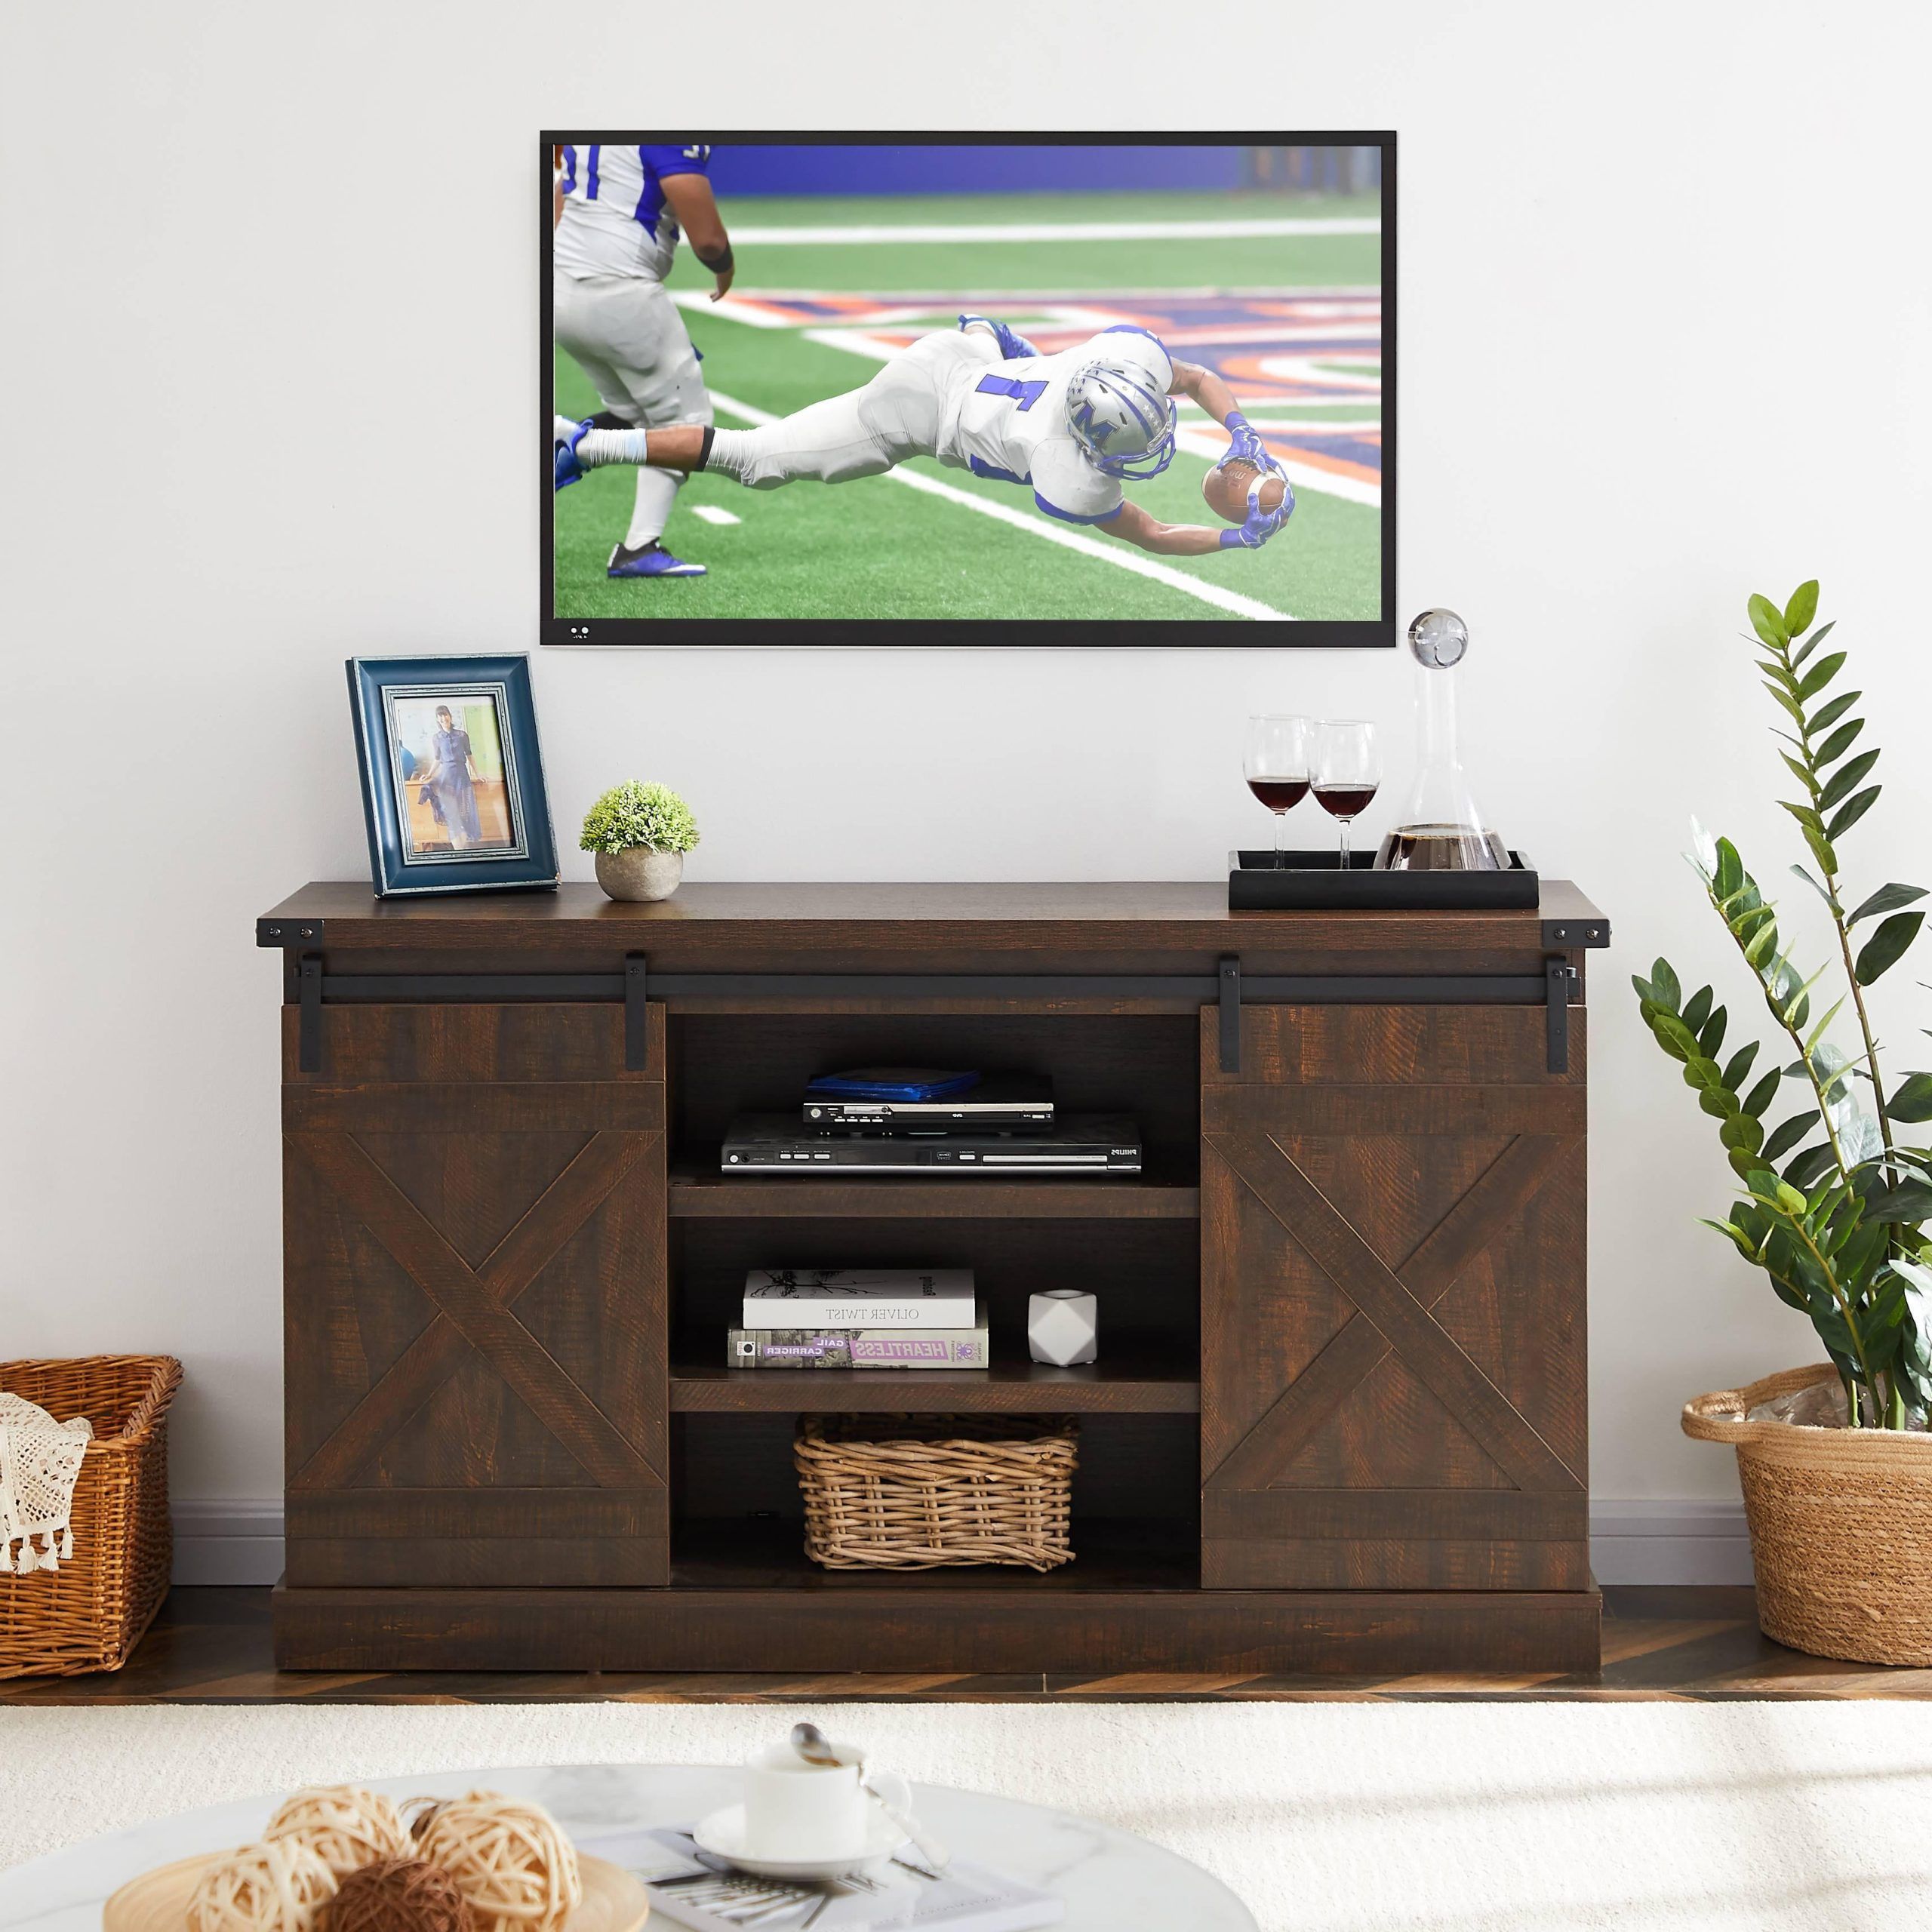 Cafe Tv Stands With Storage In Well Known Sliding Barn Door Tv Cabinet With Storage Space And Shelf, Modern (View 13 of 15)